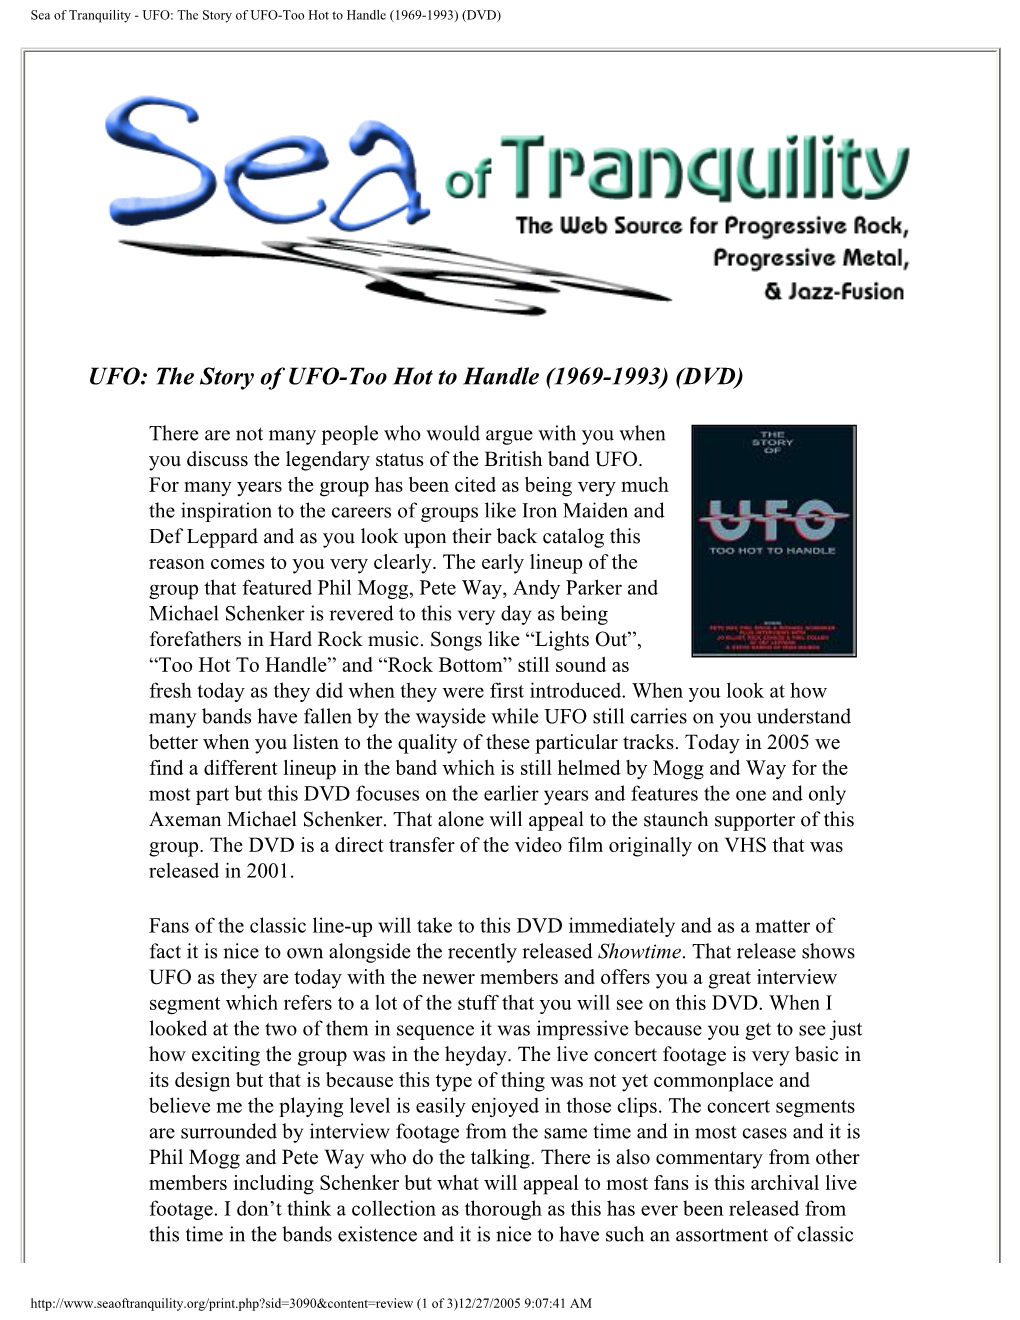 Sea of Tranquility - UFO: the Story of UFO-Too Hot to Handle (1969-1993) (DVD)